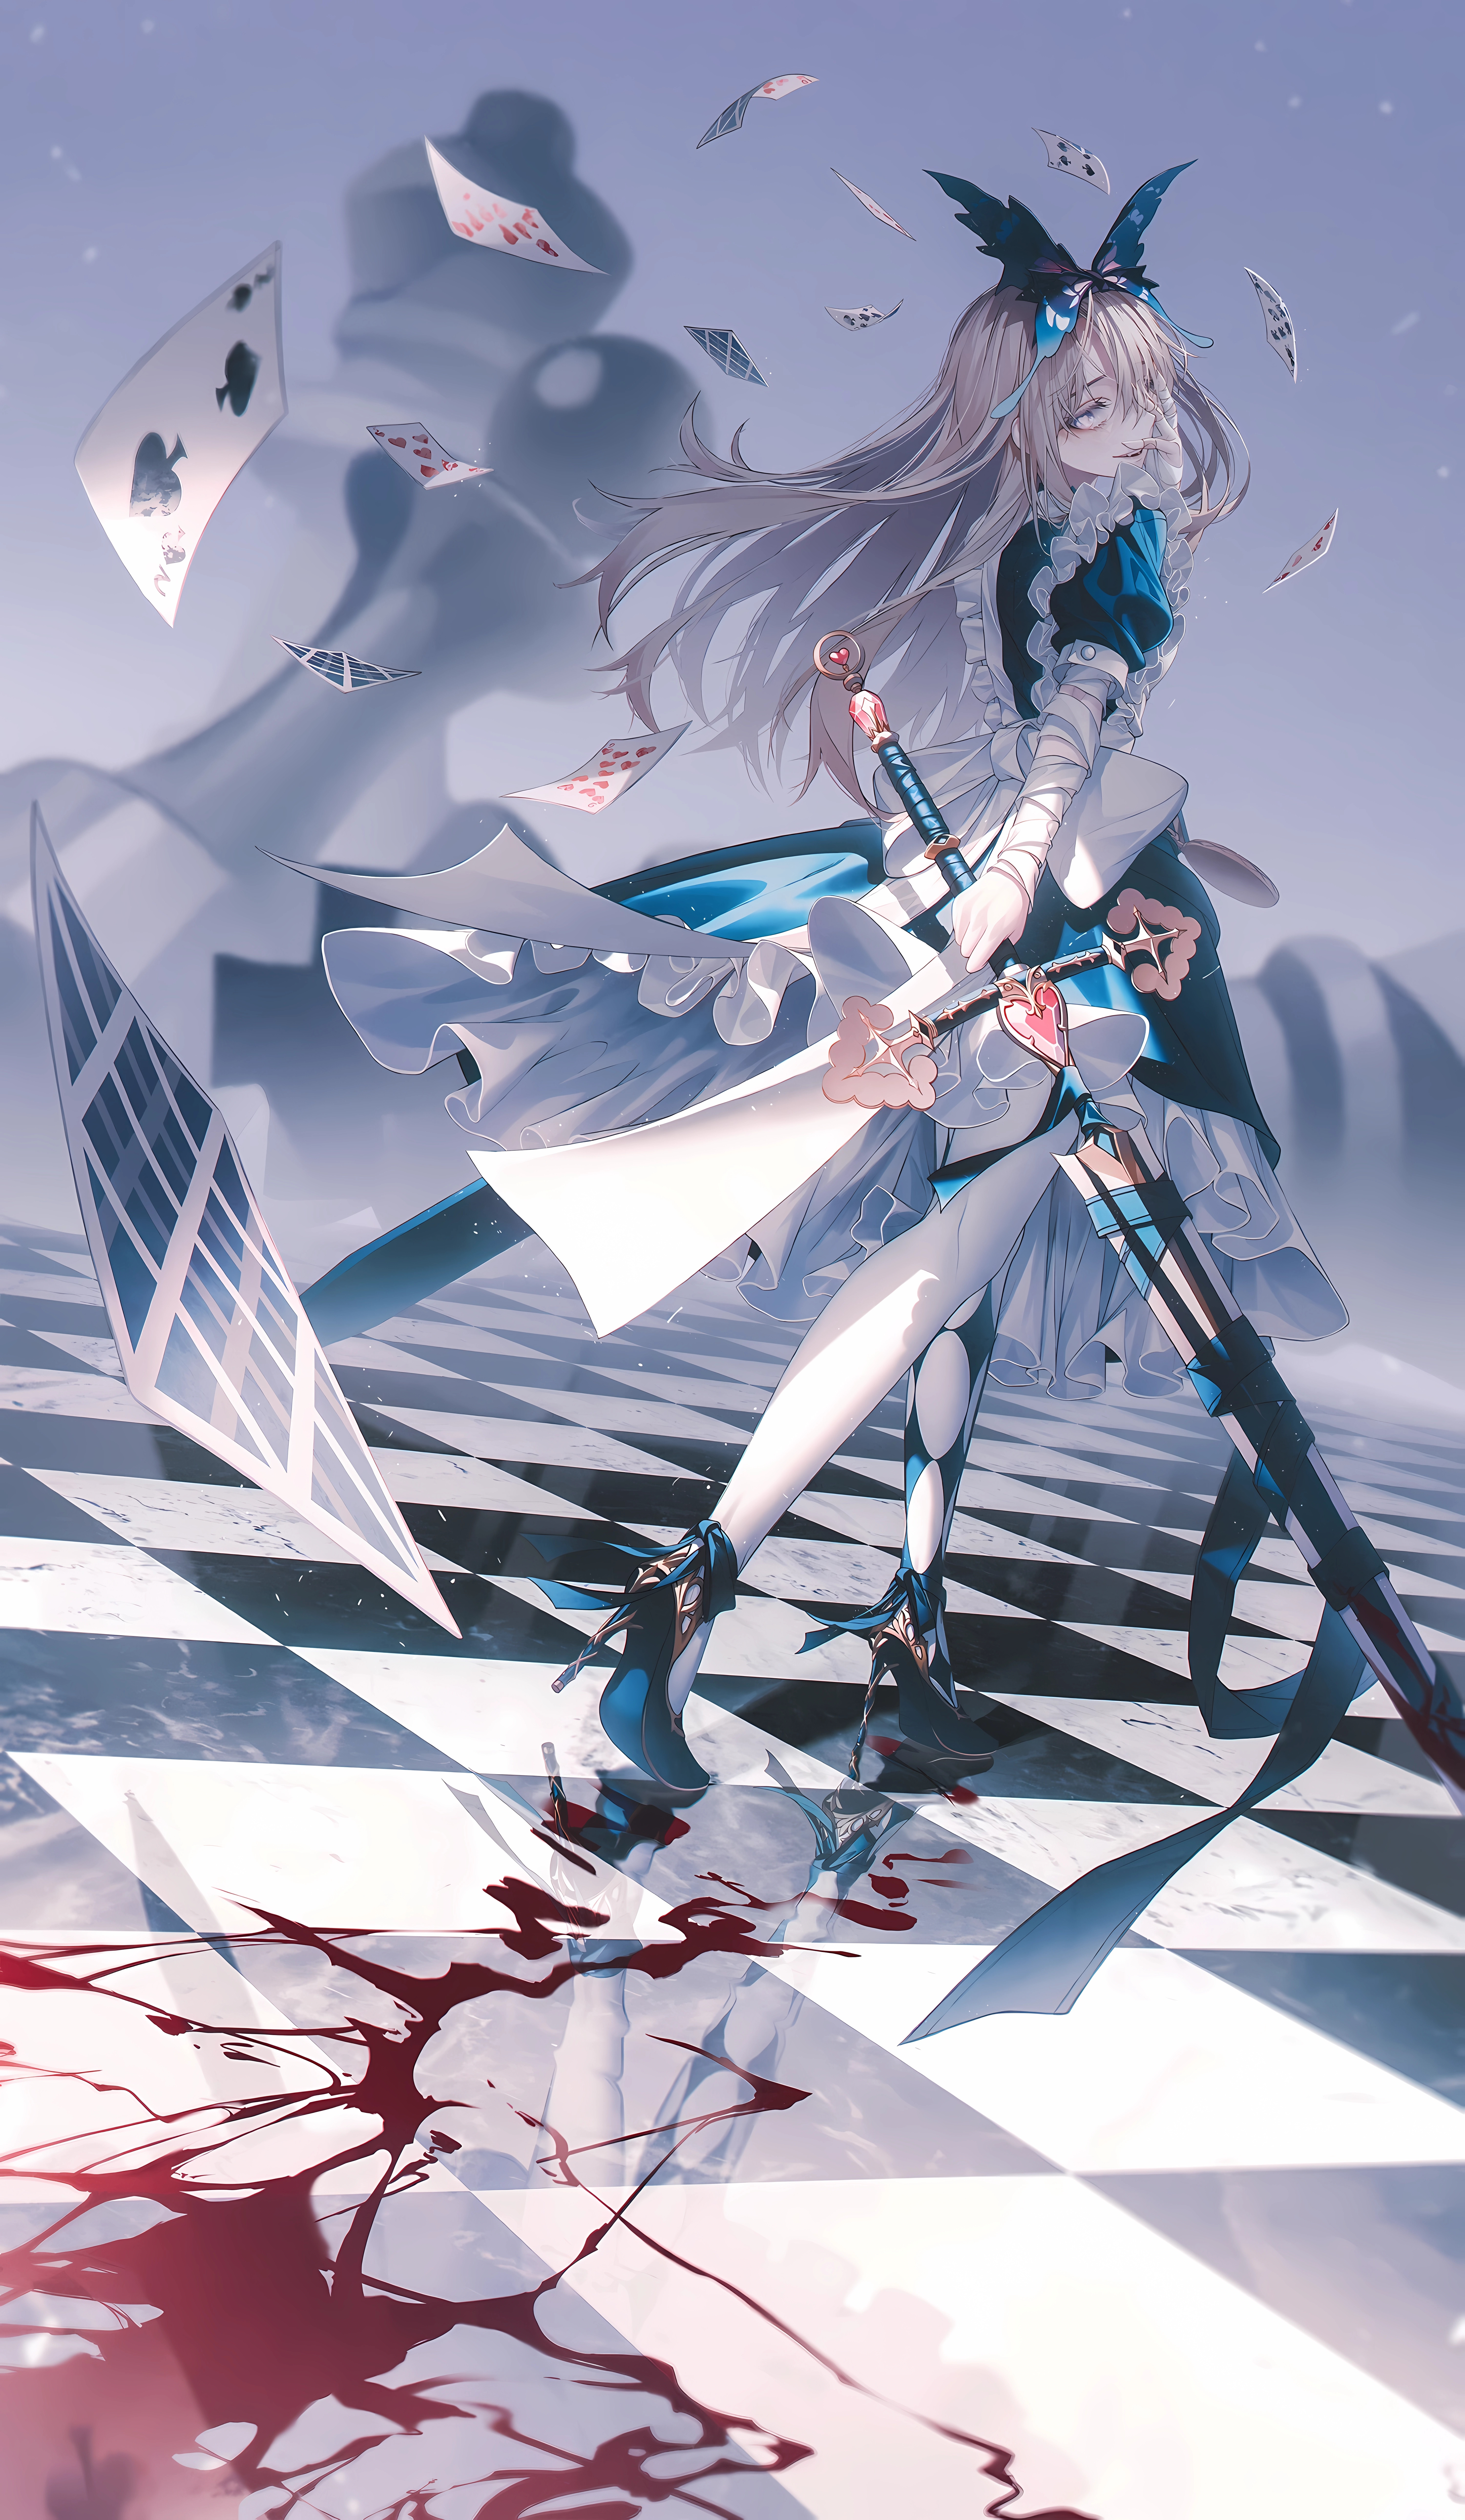 Anime 6000x10320 anime anime girls Alice in Wonderland checkered blood heels sword weapon standing looking back cards looking at viewer smiling long hair dress heart eyes reflection portrait display walking